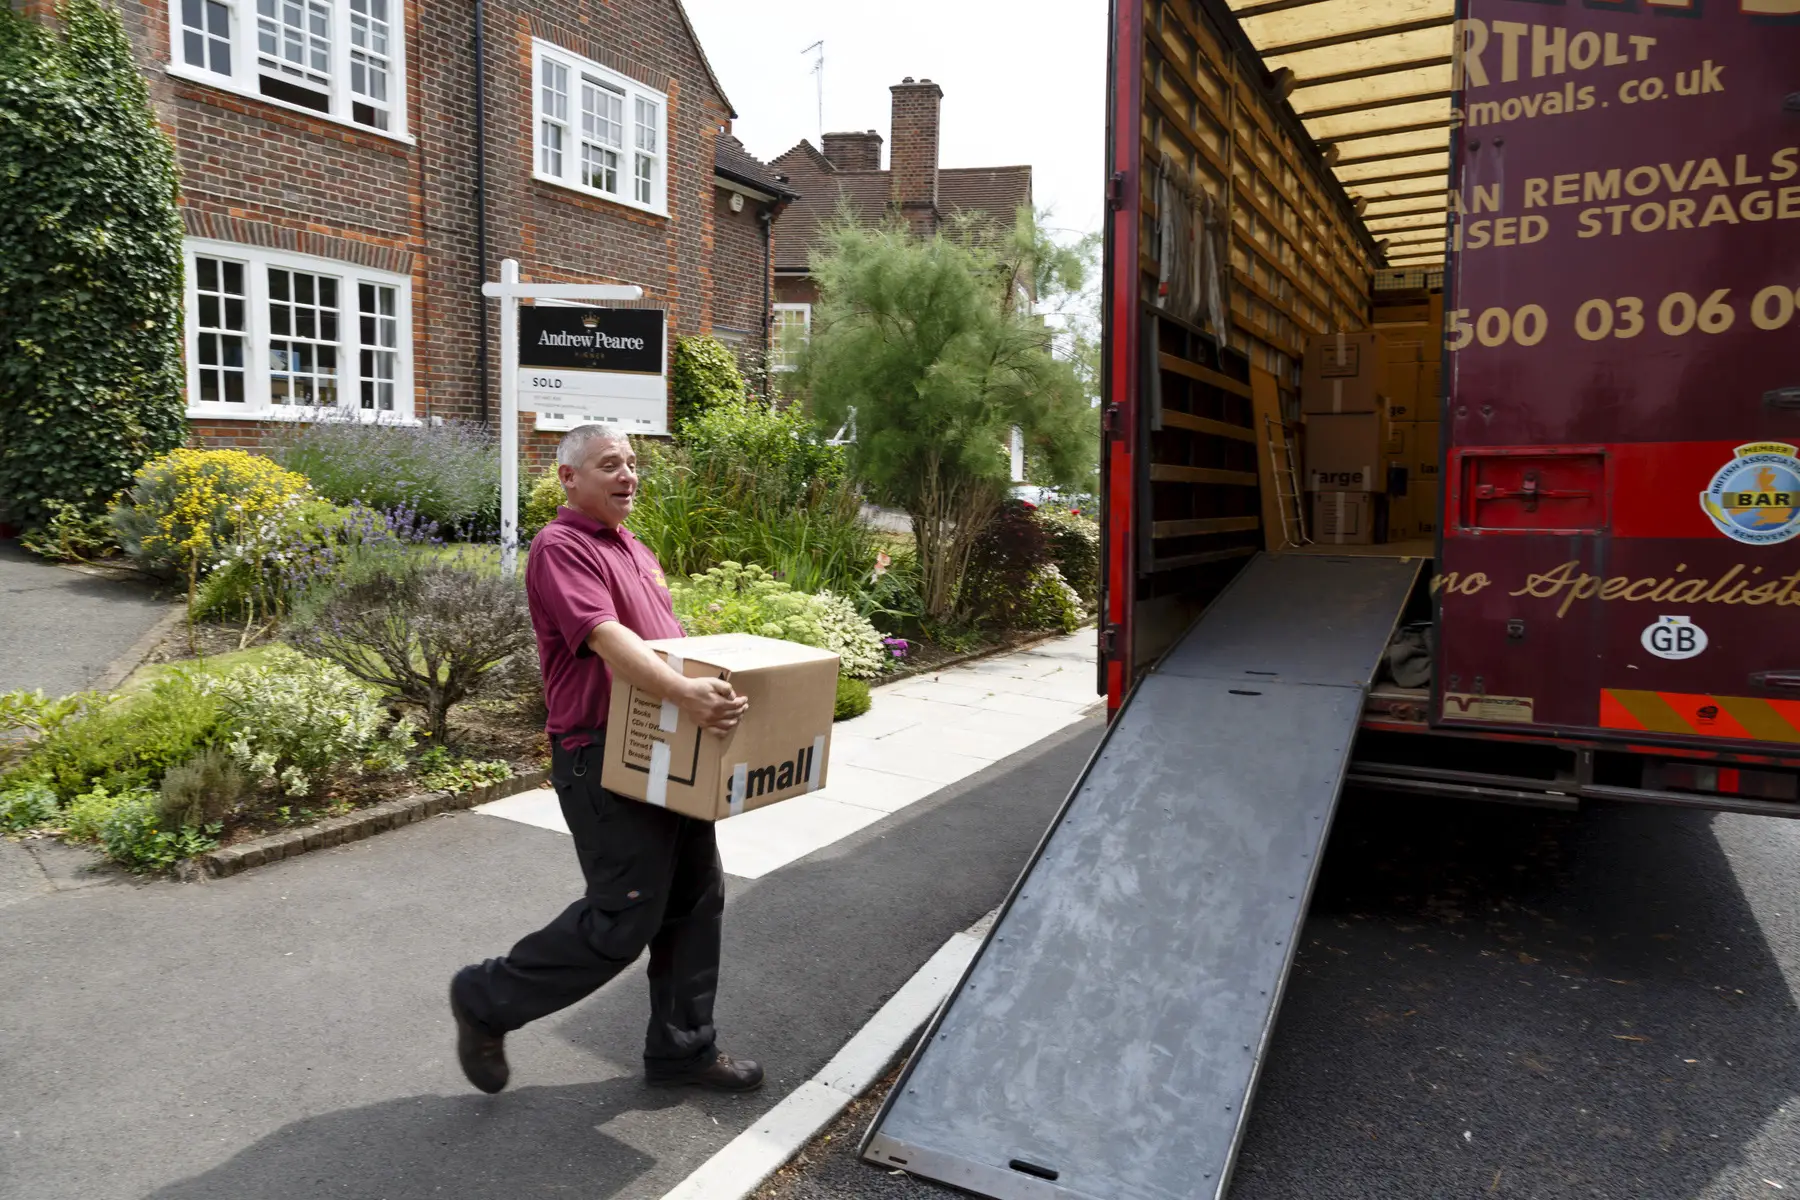 Man packing boxes into a moving van in the UK